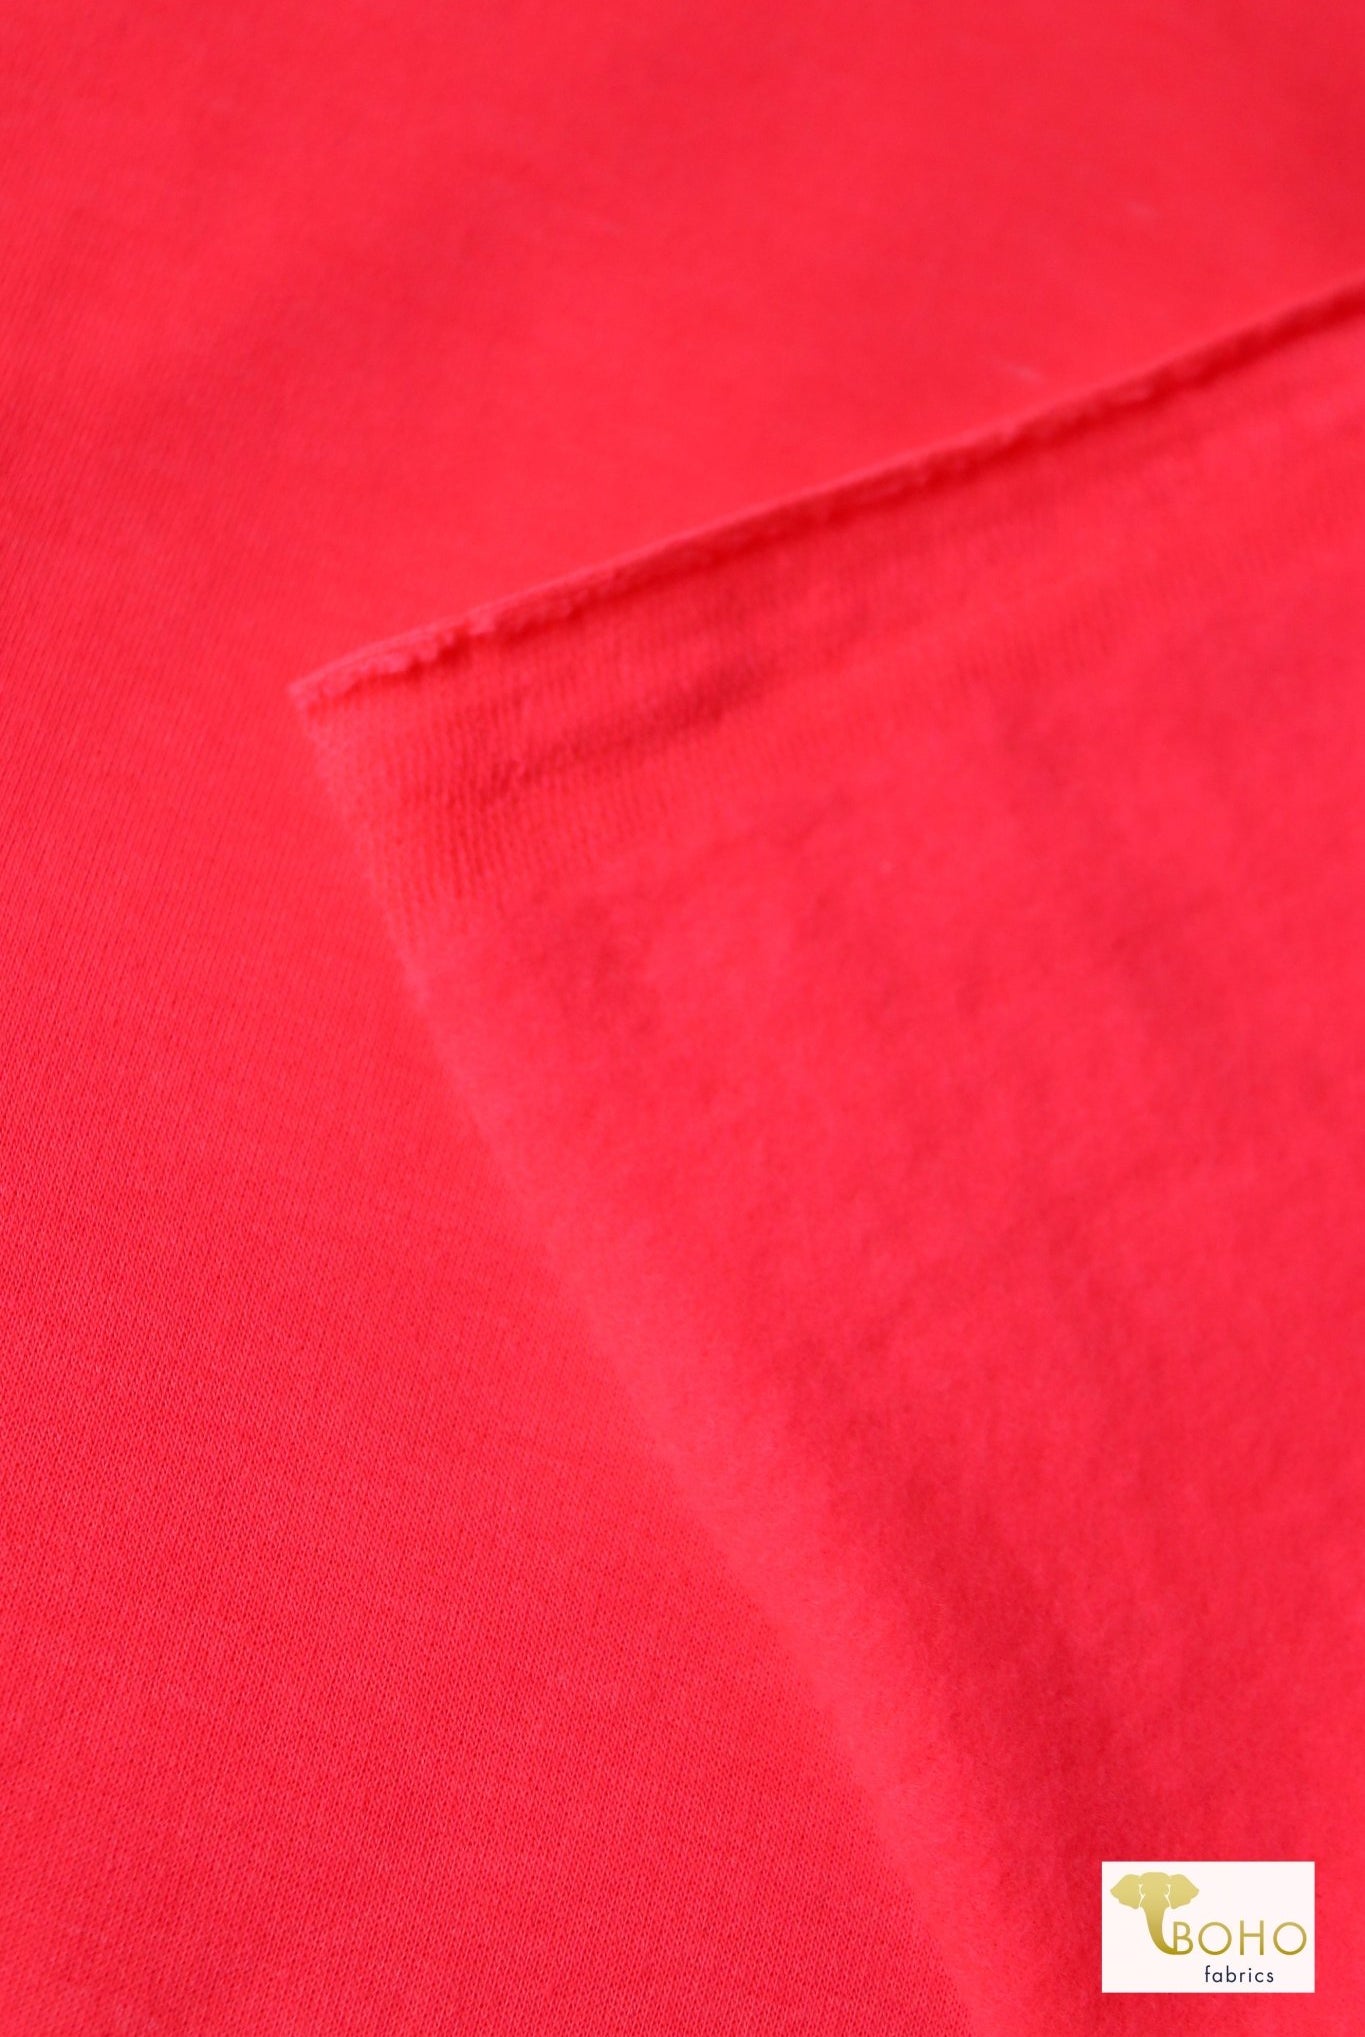 Last Cuts! Neon Coral, Brushed French Terry Knit Fabric - Boho Fabrics